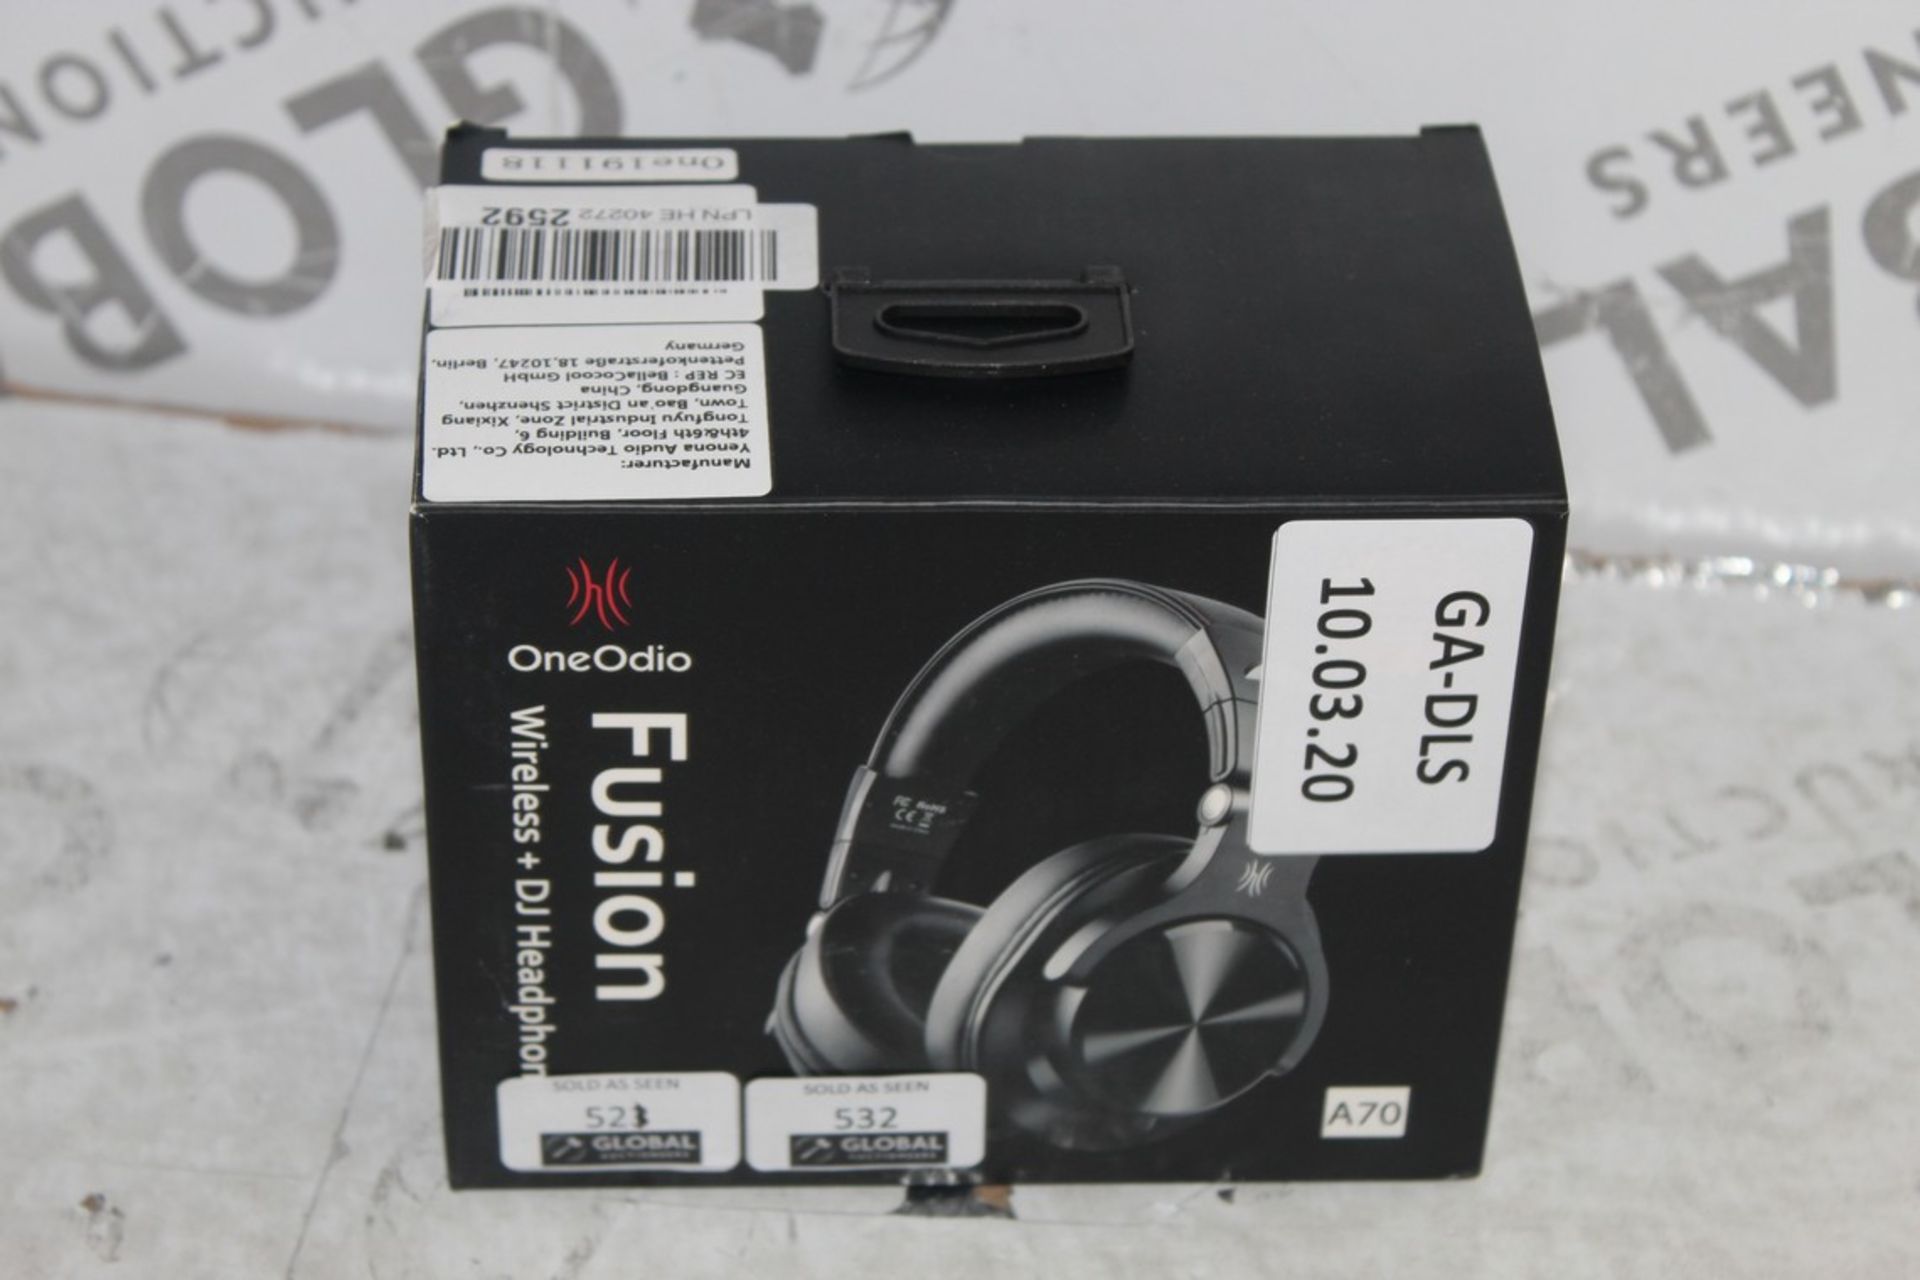 Boxed Brand New Pairs One Audio Fusion A70 All Black Wireless DJ Headphones RRP £45 Each (Appraisals